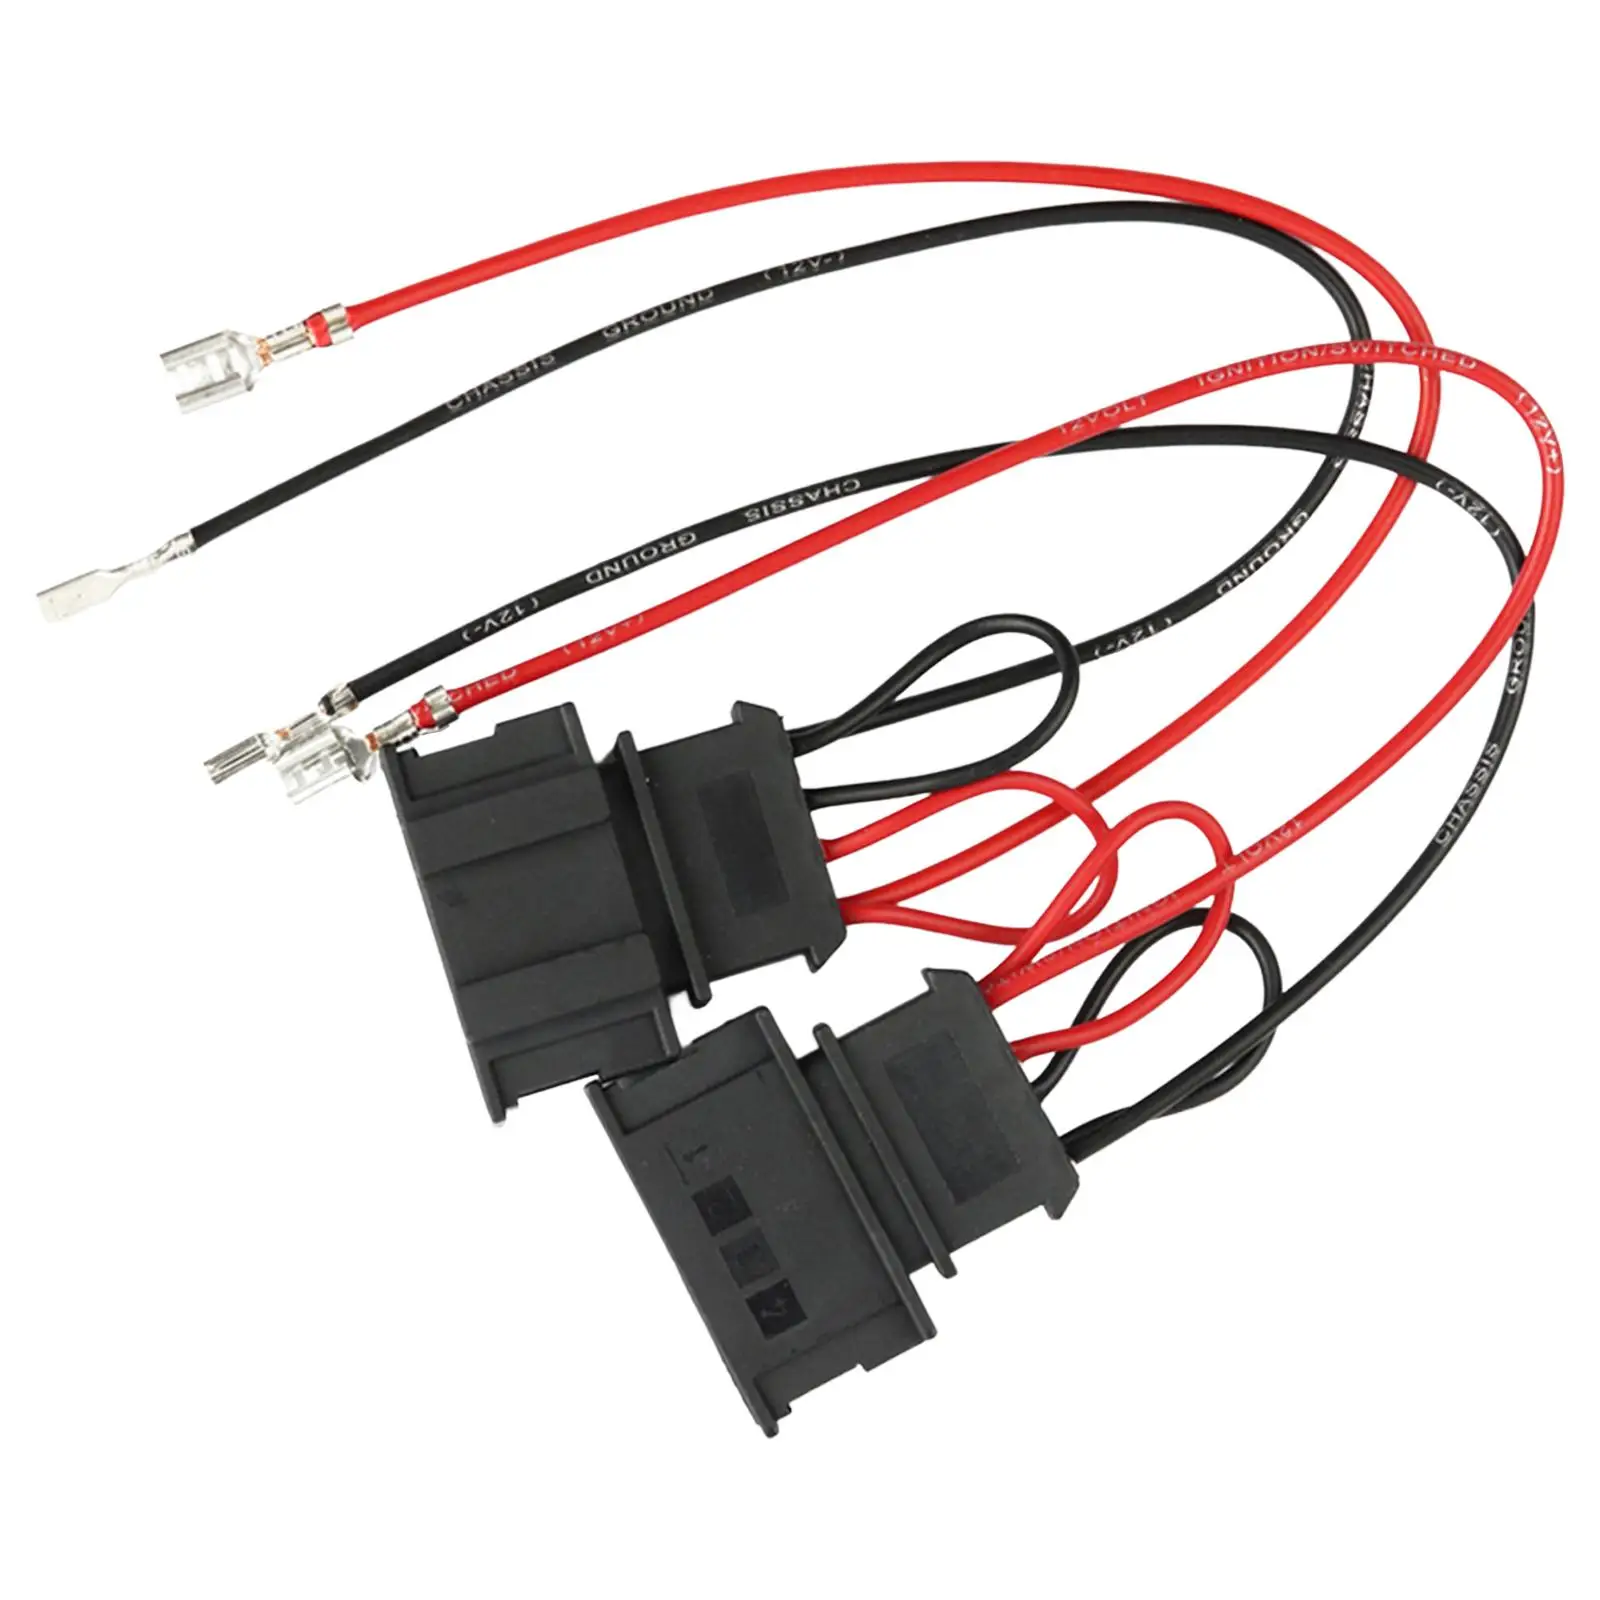 2x Car Speaker Wire Harness Adaptor Accessories Vehicle Wiring Plug for Golf